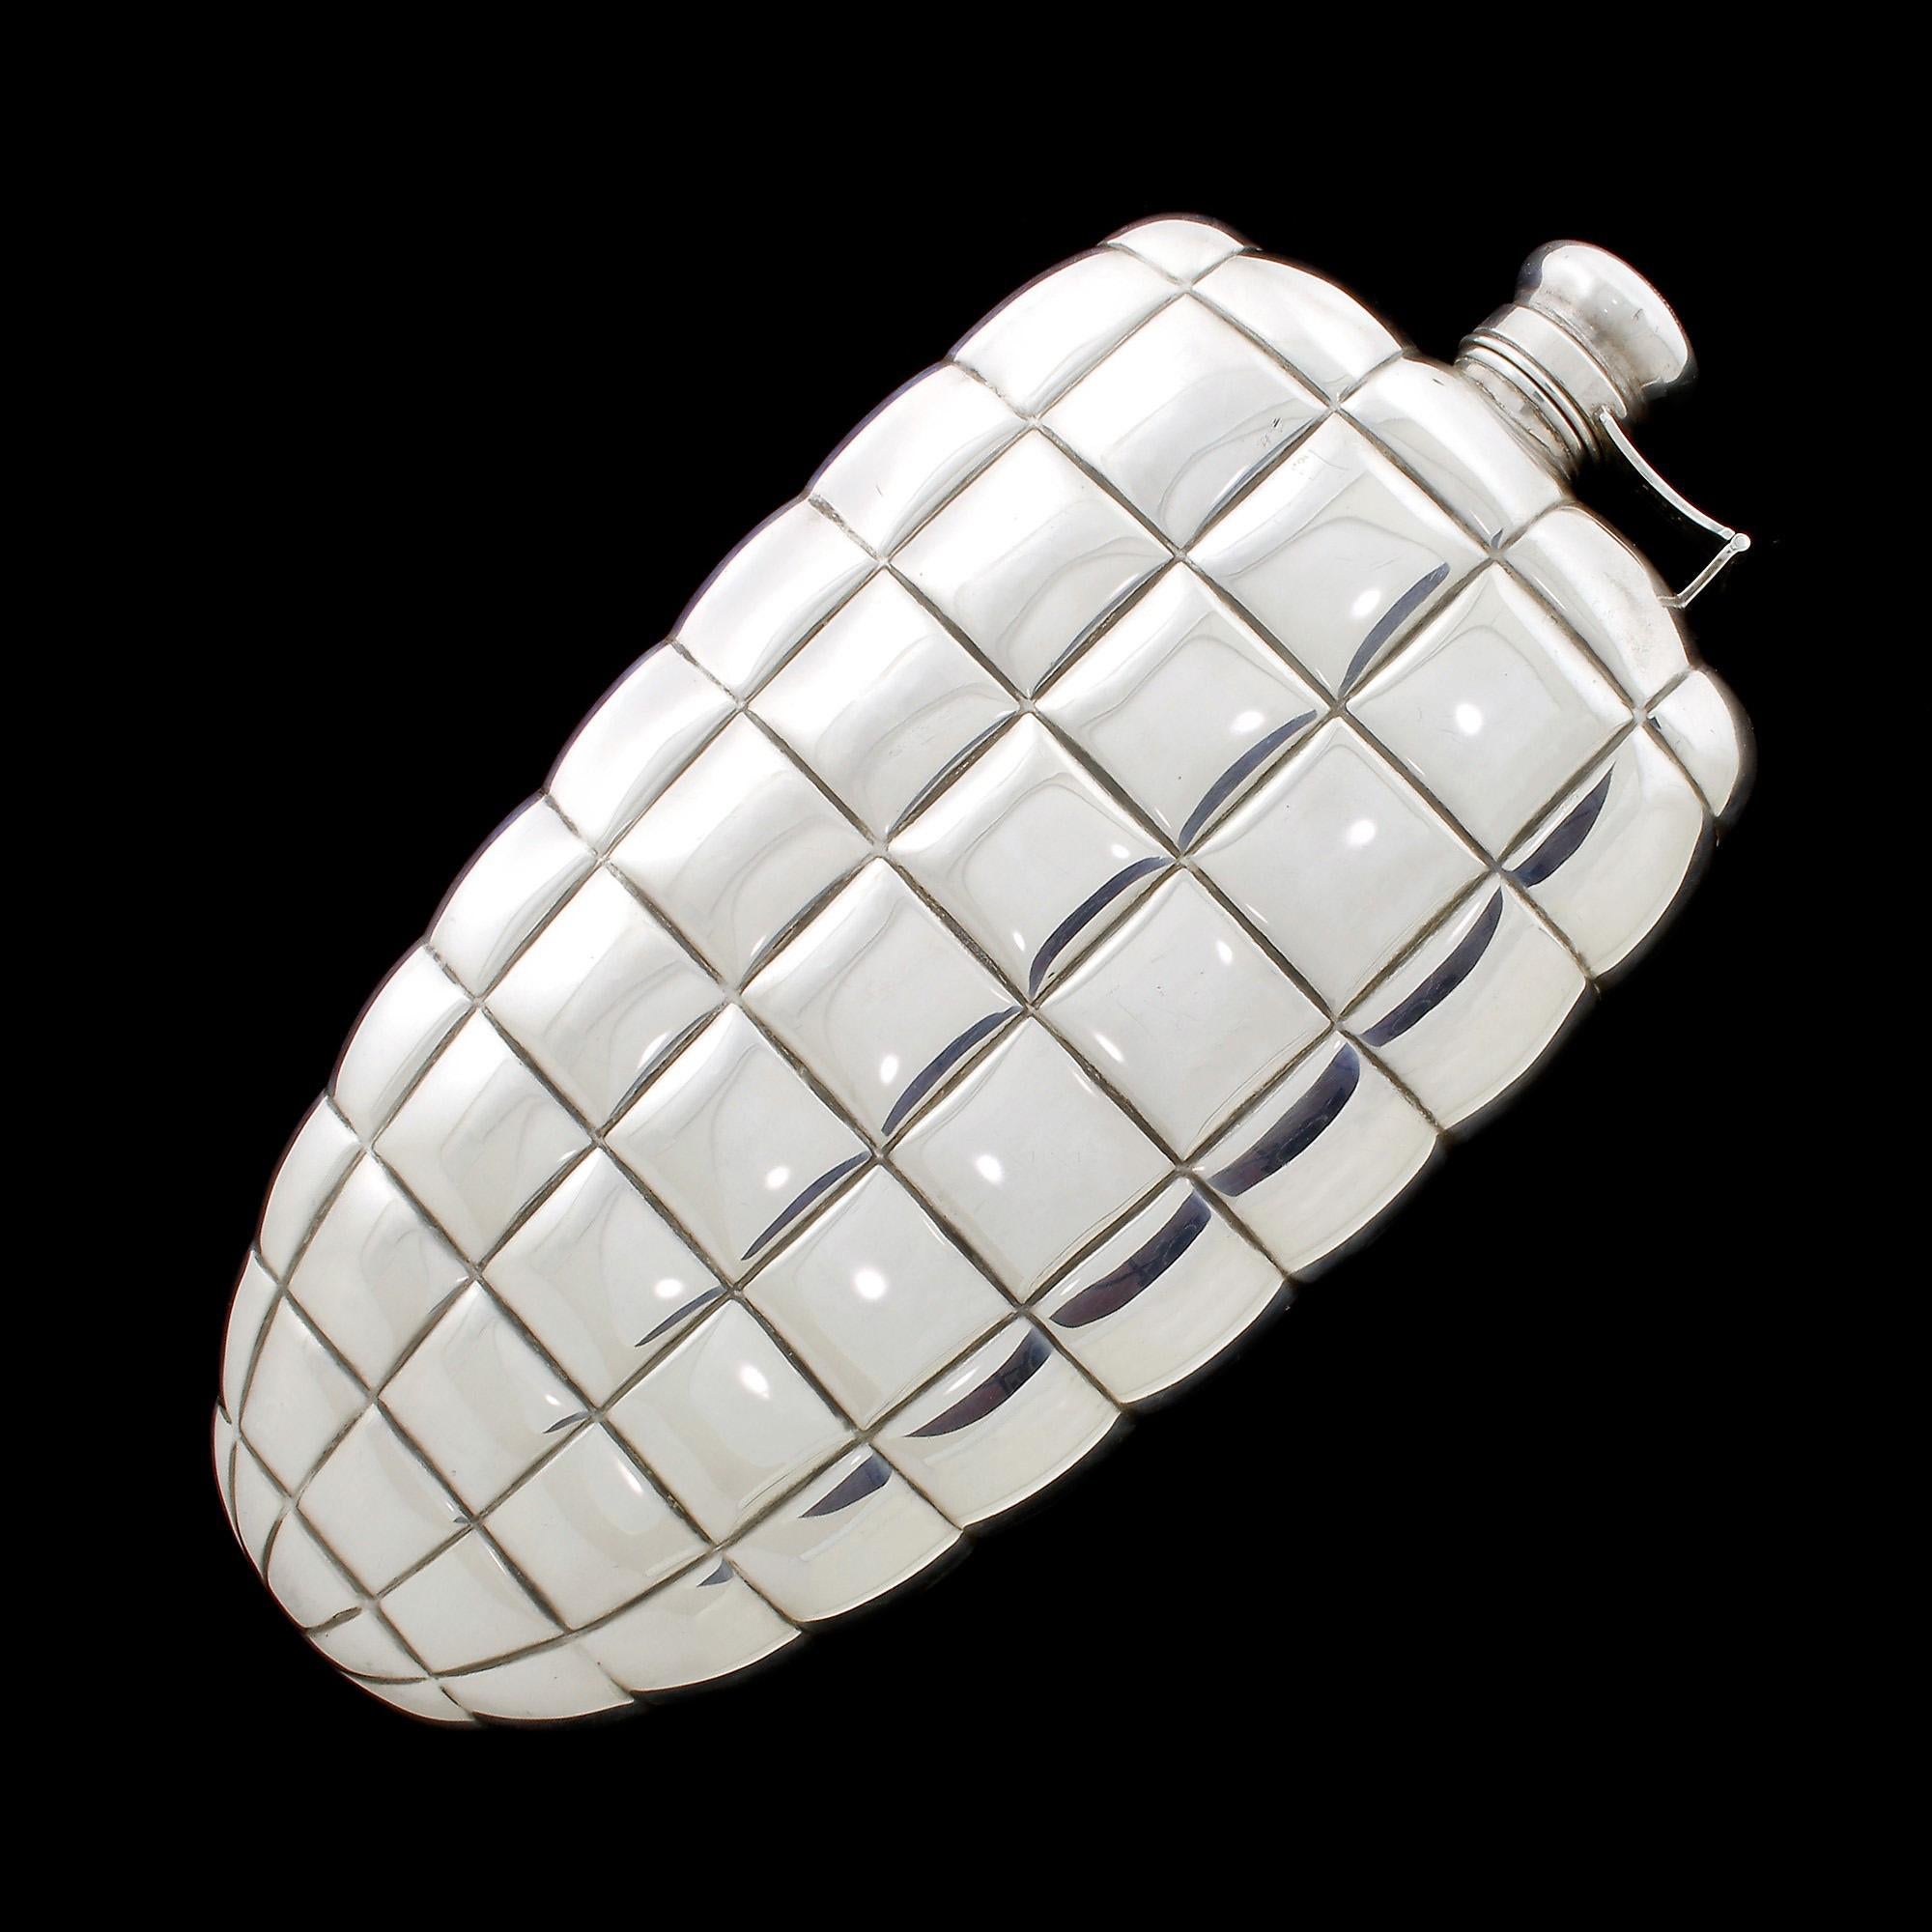 We are happy to present this beautiful vintage sterling silver 1 pint flask made by Gorham in the elusive Crocodile pattern.
This exact design and size was a favorite of the screen legend Clark Gable, and they are highly sought after today.
Ever